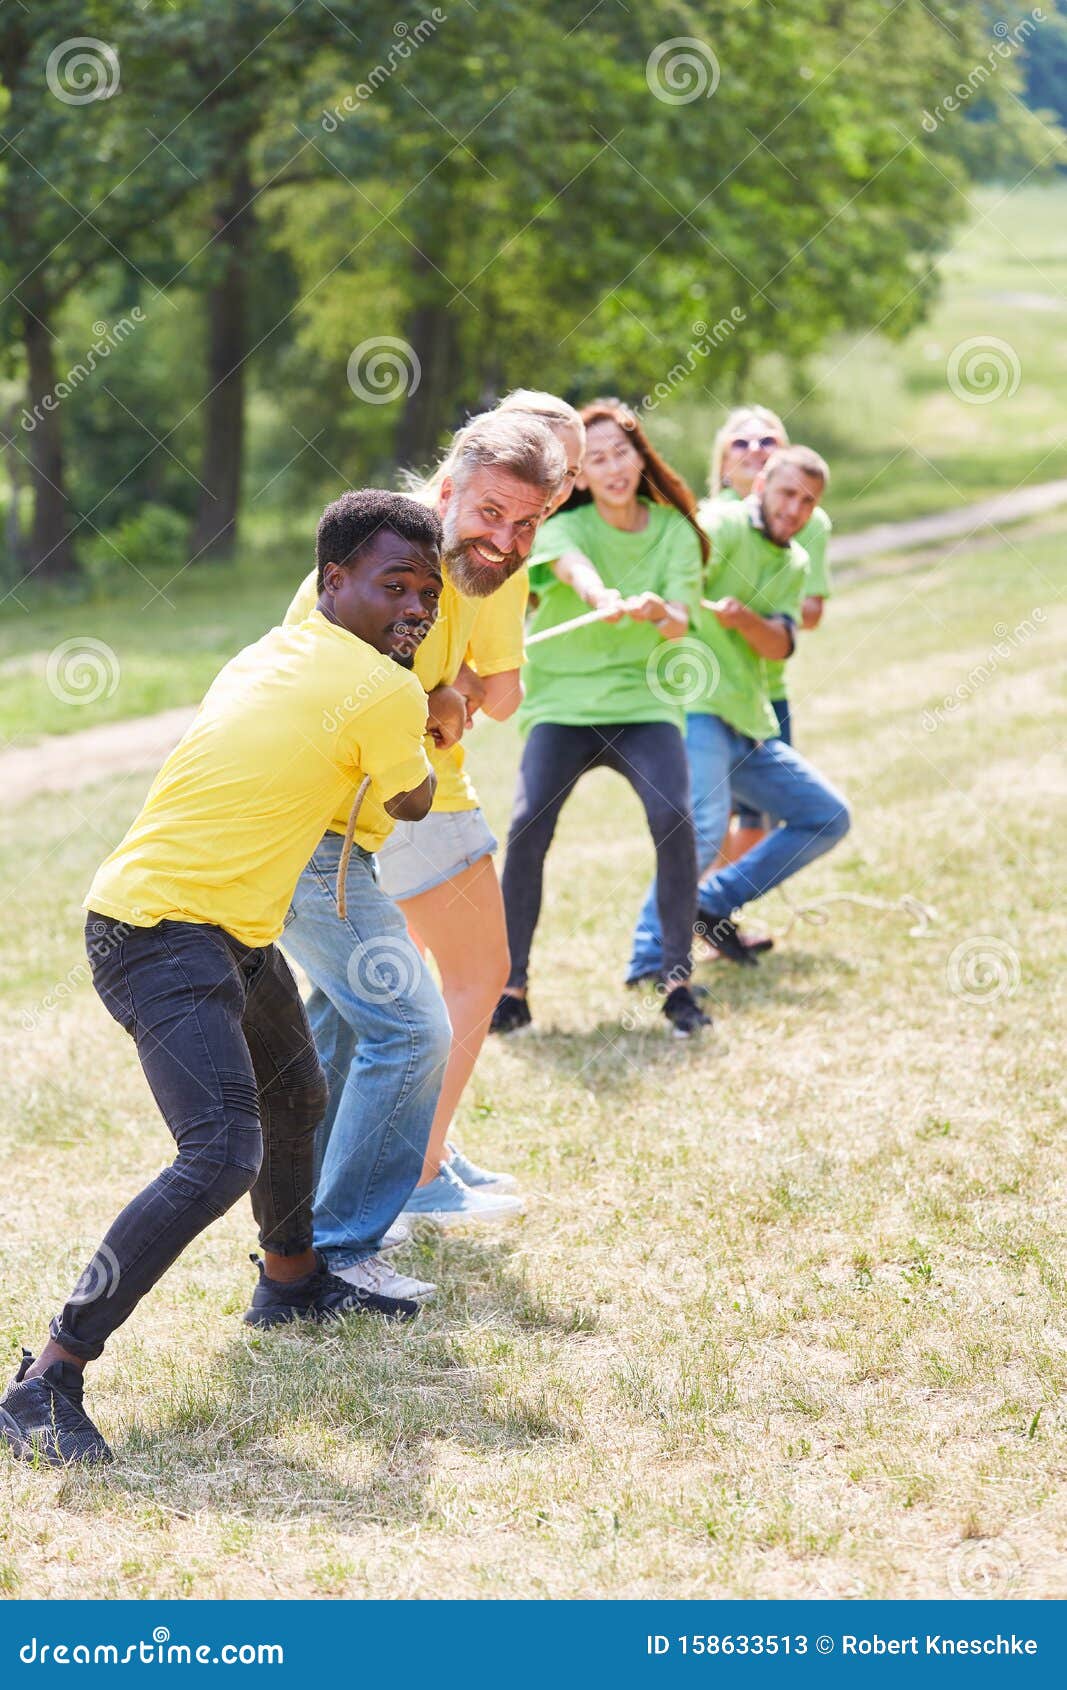 Teams Measure Forces in Tug-of-war Stock Image - Image of outside, pull ...